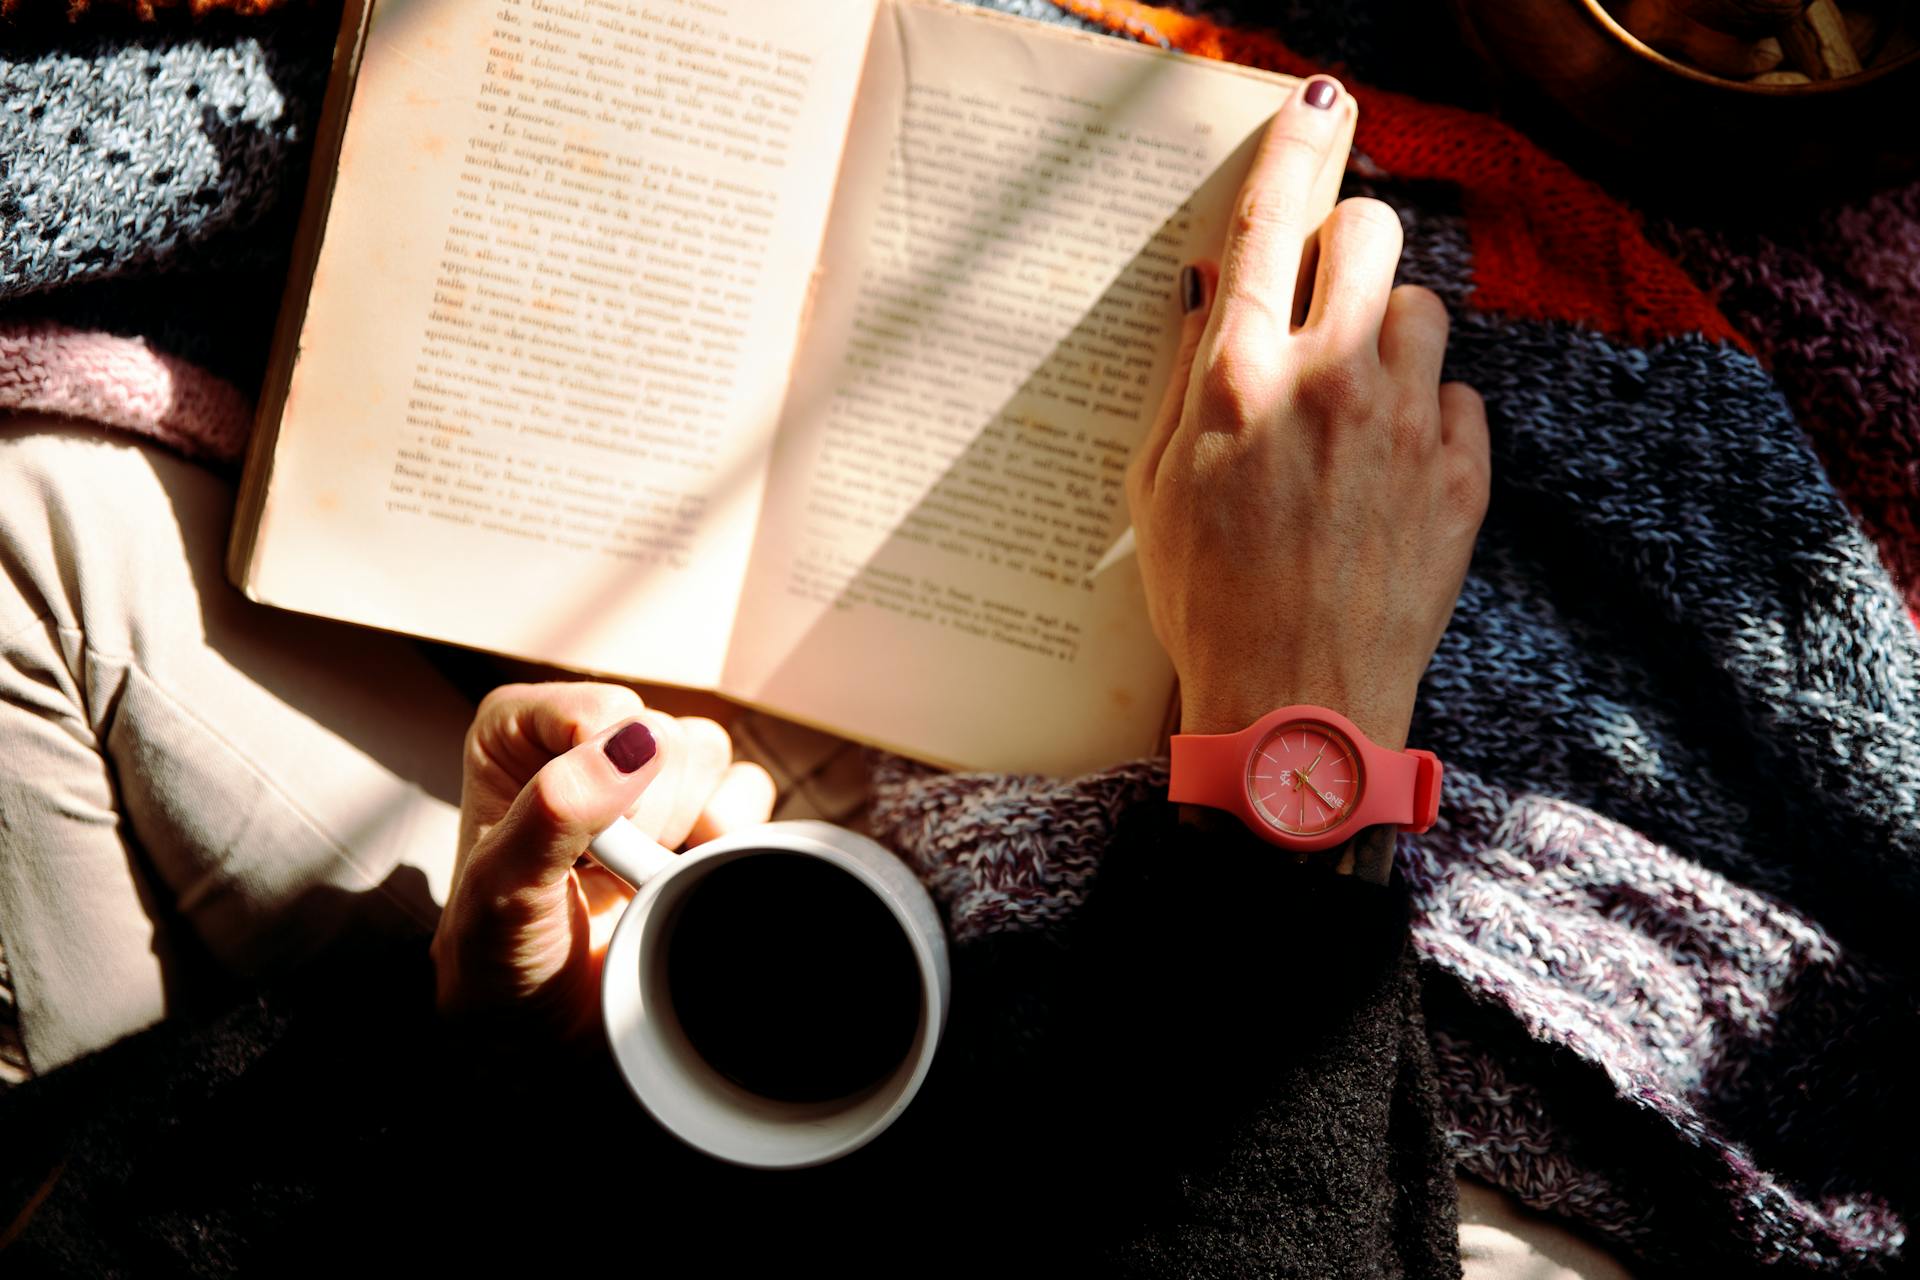 Person reading a book and holding a mug | Source: Pexels